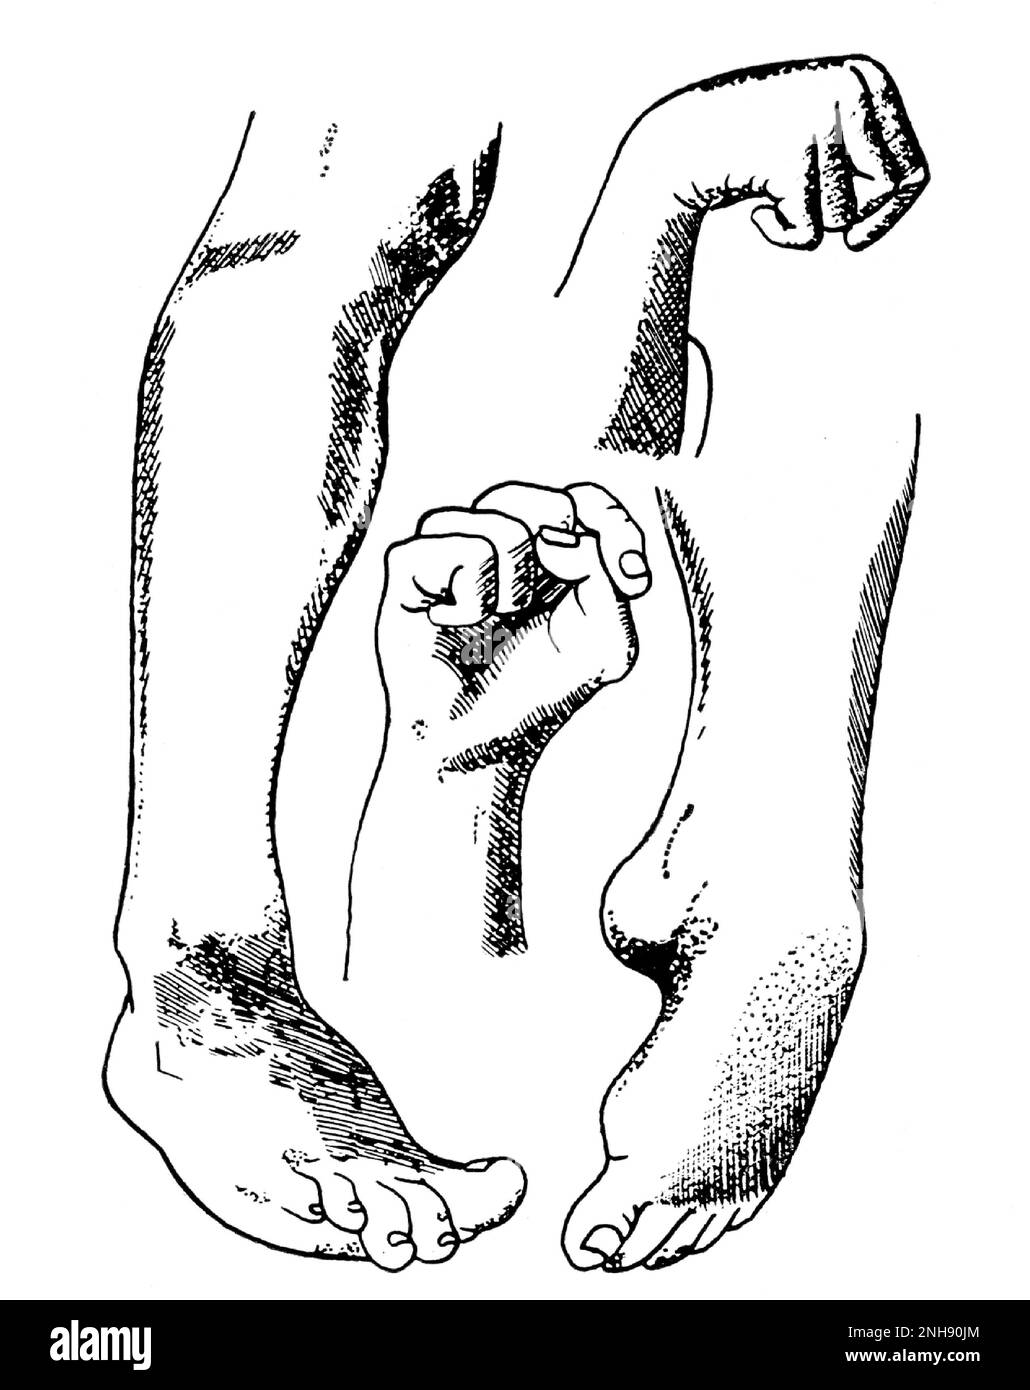 Illustration showing the convulsive symptoms of ergot poisoning. Claviceps purpurea (rye ergot fungus) grows on rye and related plants, and produces alkaloids that can cause ergotism in humans and other mammals who consume grains contaminated with its fruiting structure. Illustration by T.O. Heusinger, 1856 Stock Photo